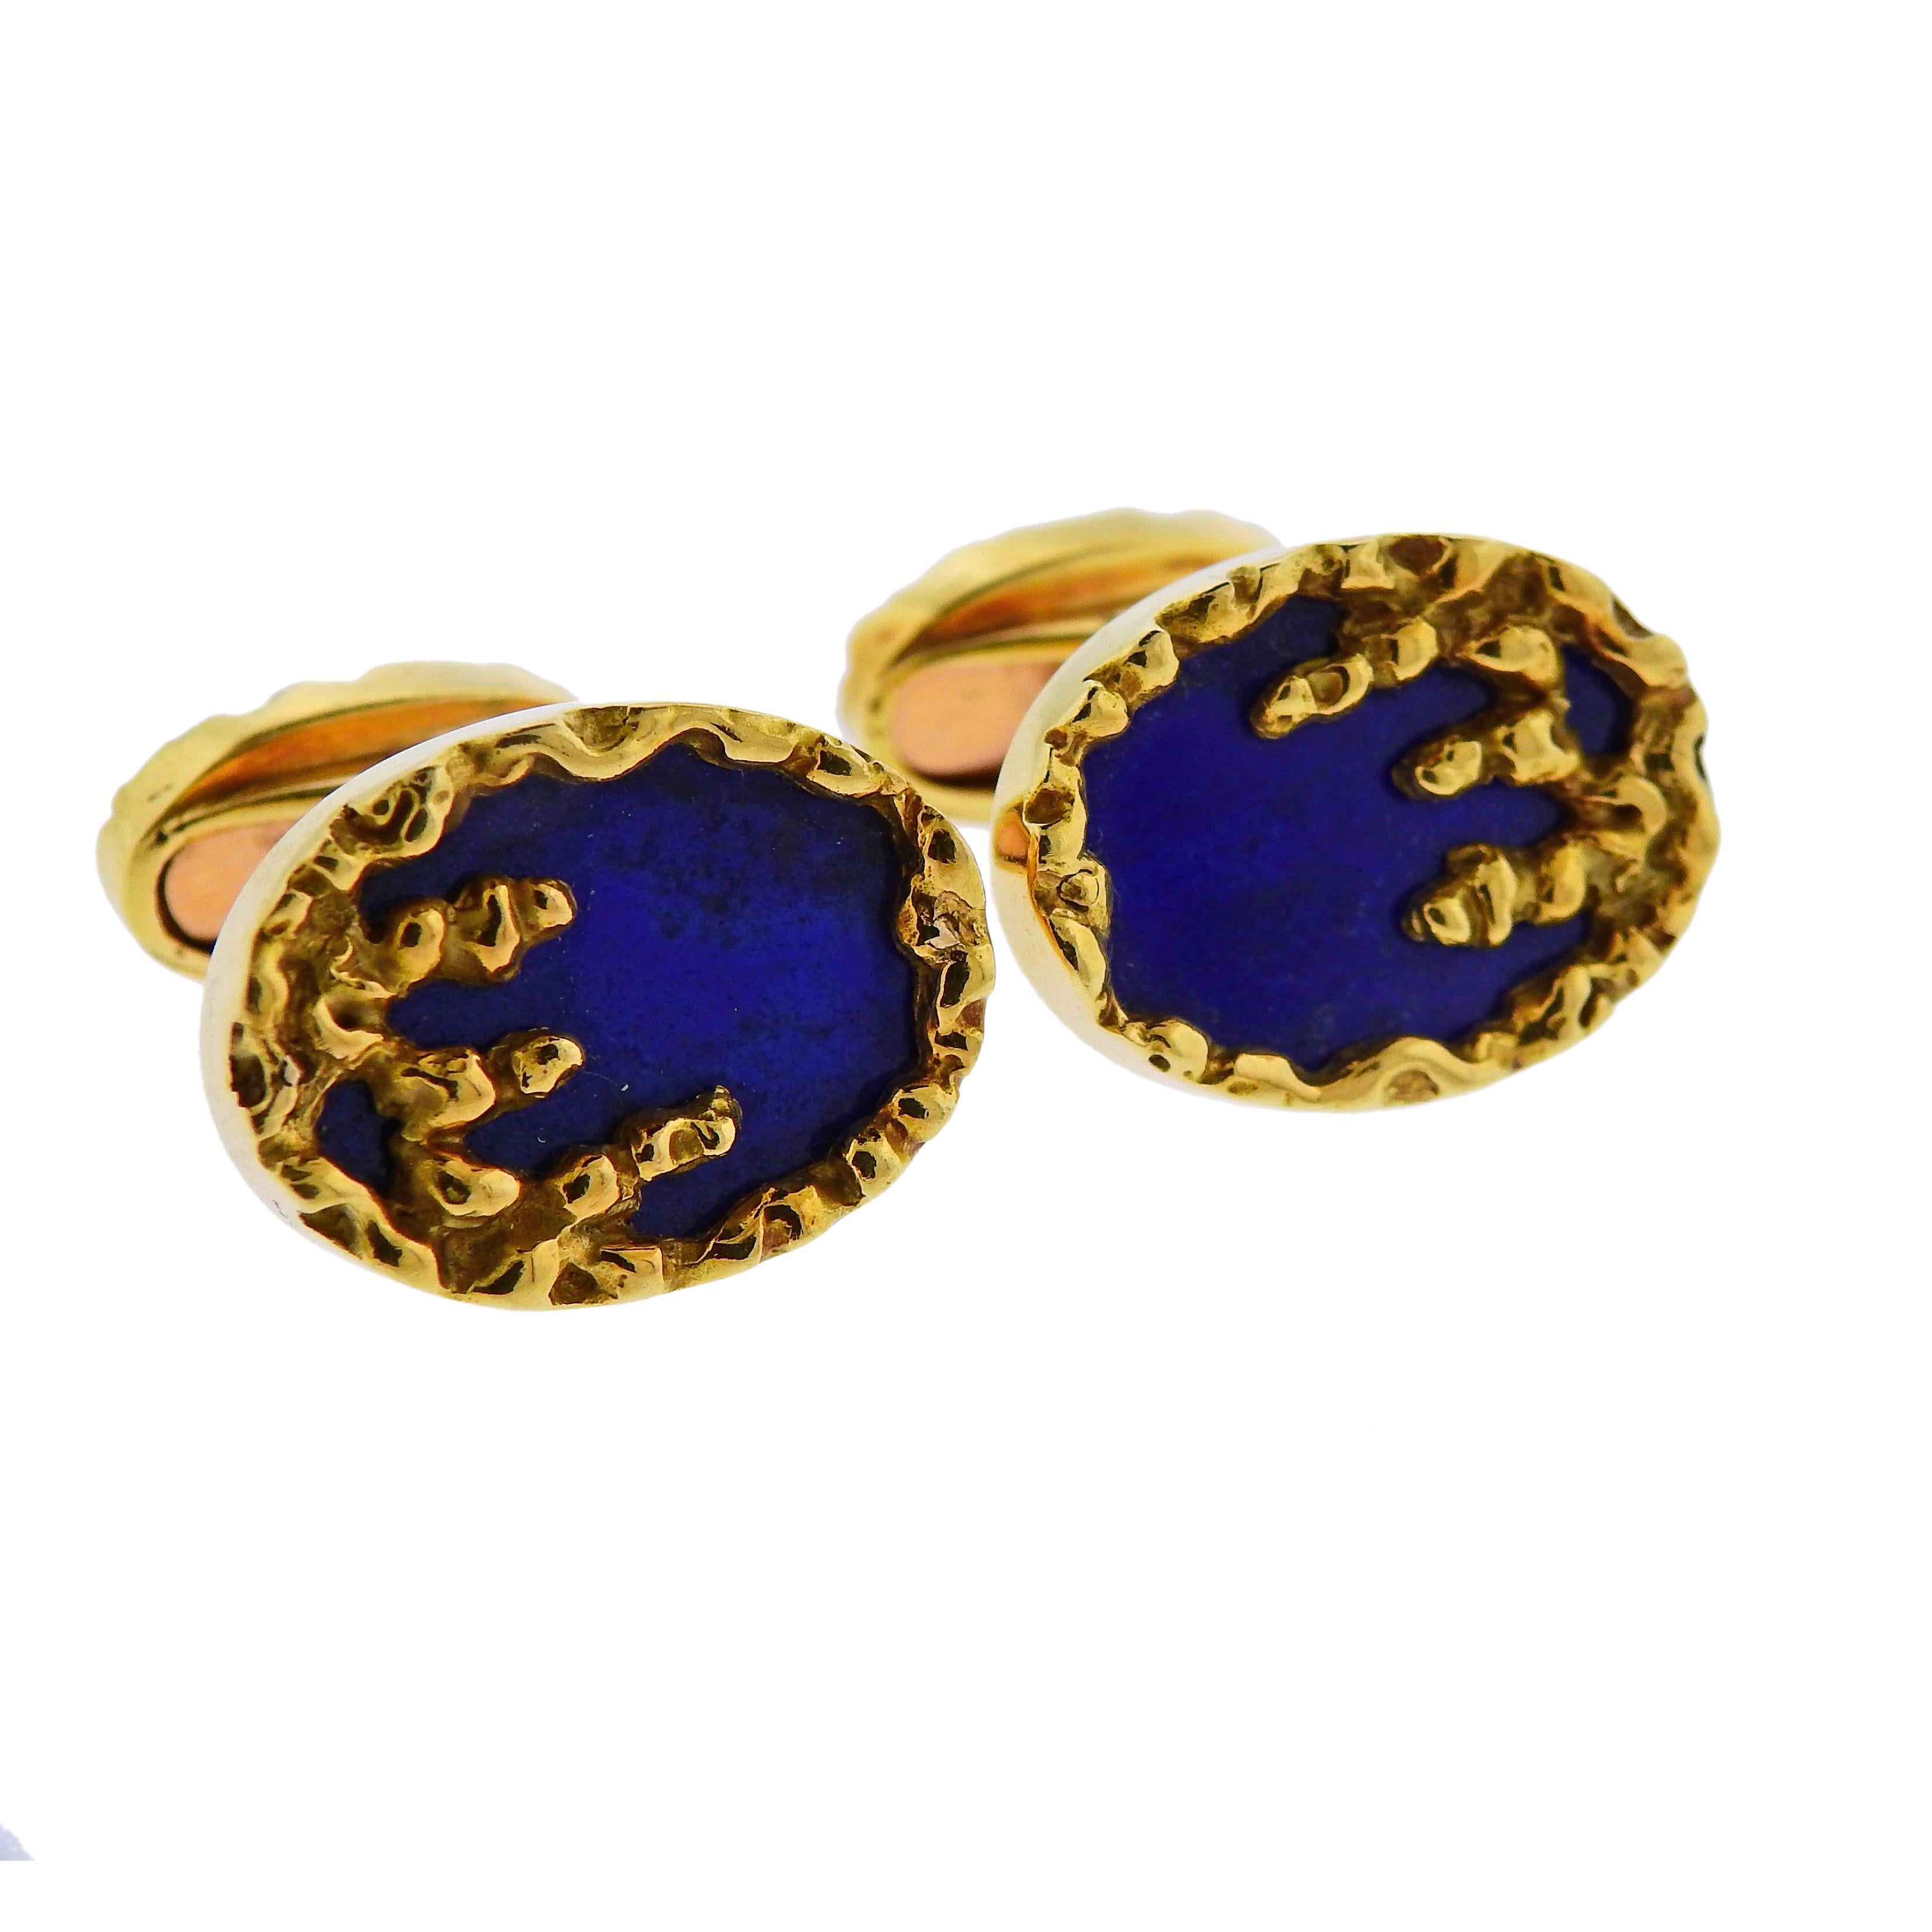 Pair of 18k yellow gold vintage cufflinks, designed by Chaumet Paris , with lapis lazuli. Cufflink top measures - 21mm x 15mm., back - 15mm x 9mm. Weight: 21.8 grams. Marked: Chaumet Paris, 542, French marks.